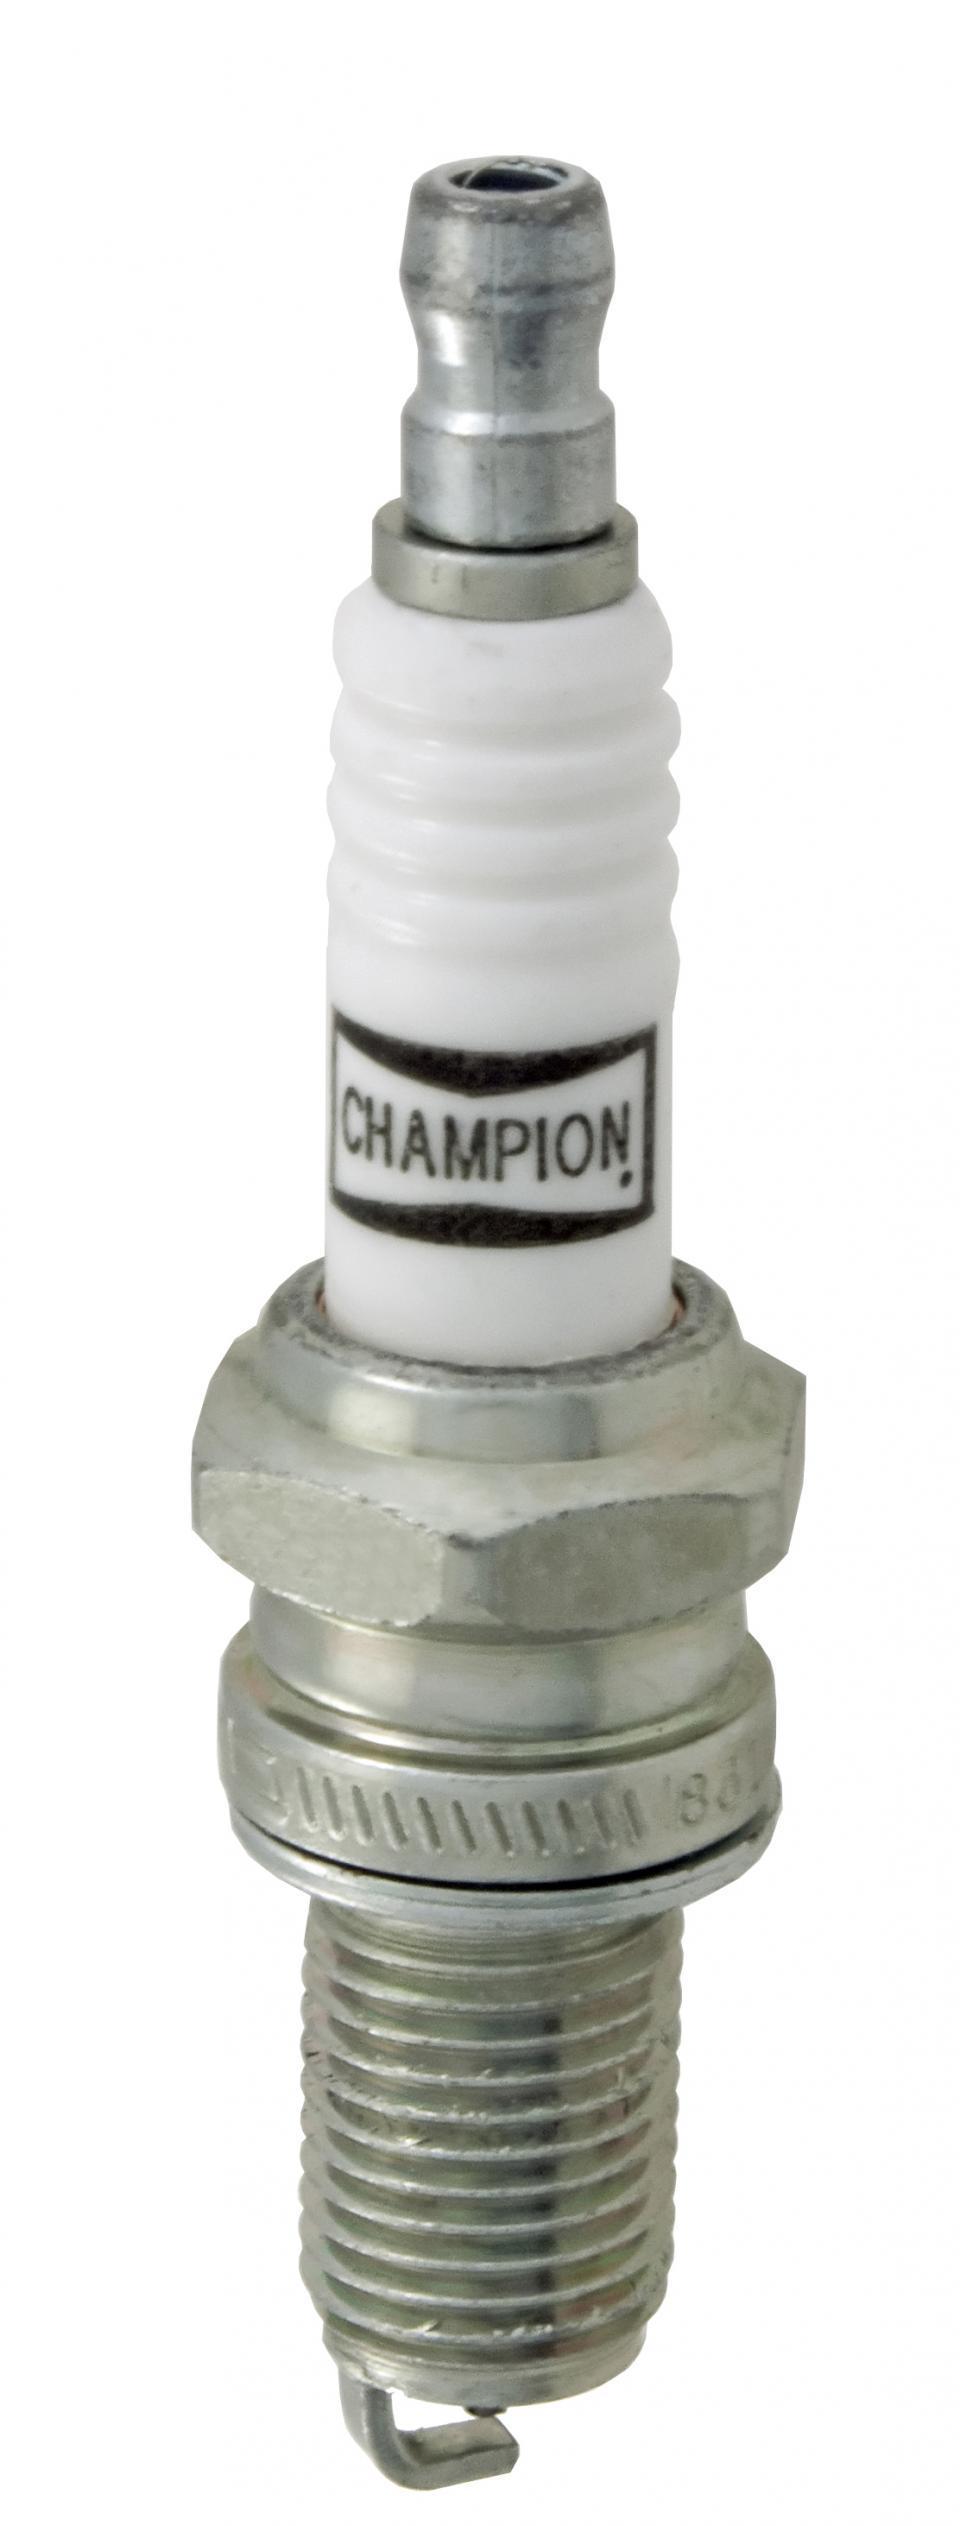 Bougie d'allumage Champion pour Auto OE012-N7BYC Neuf